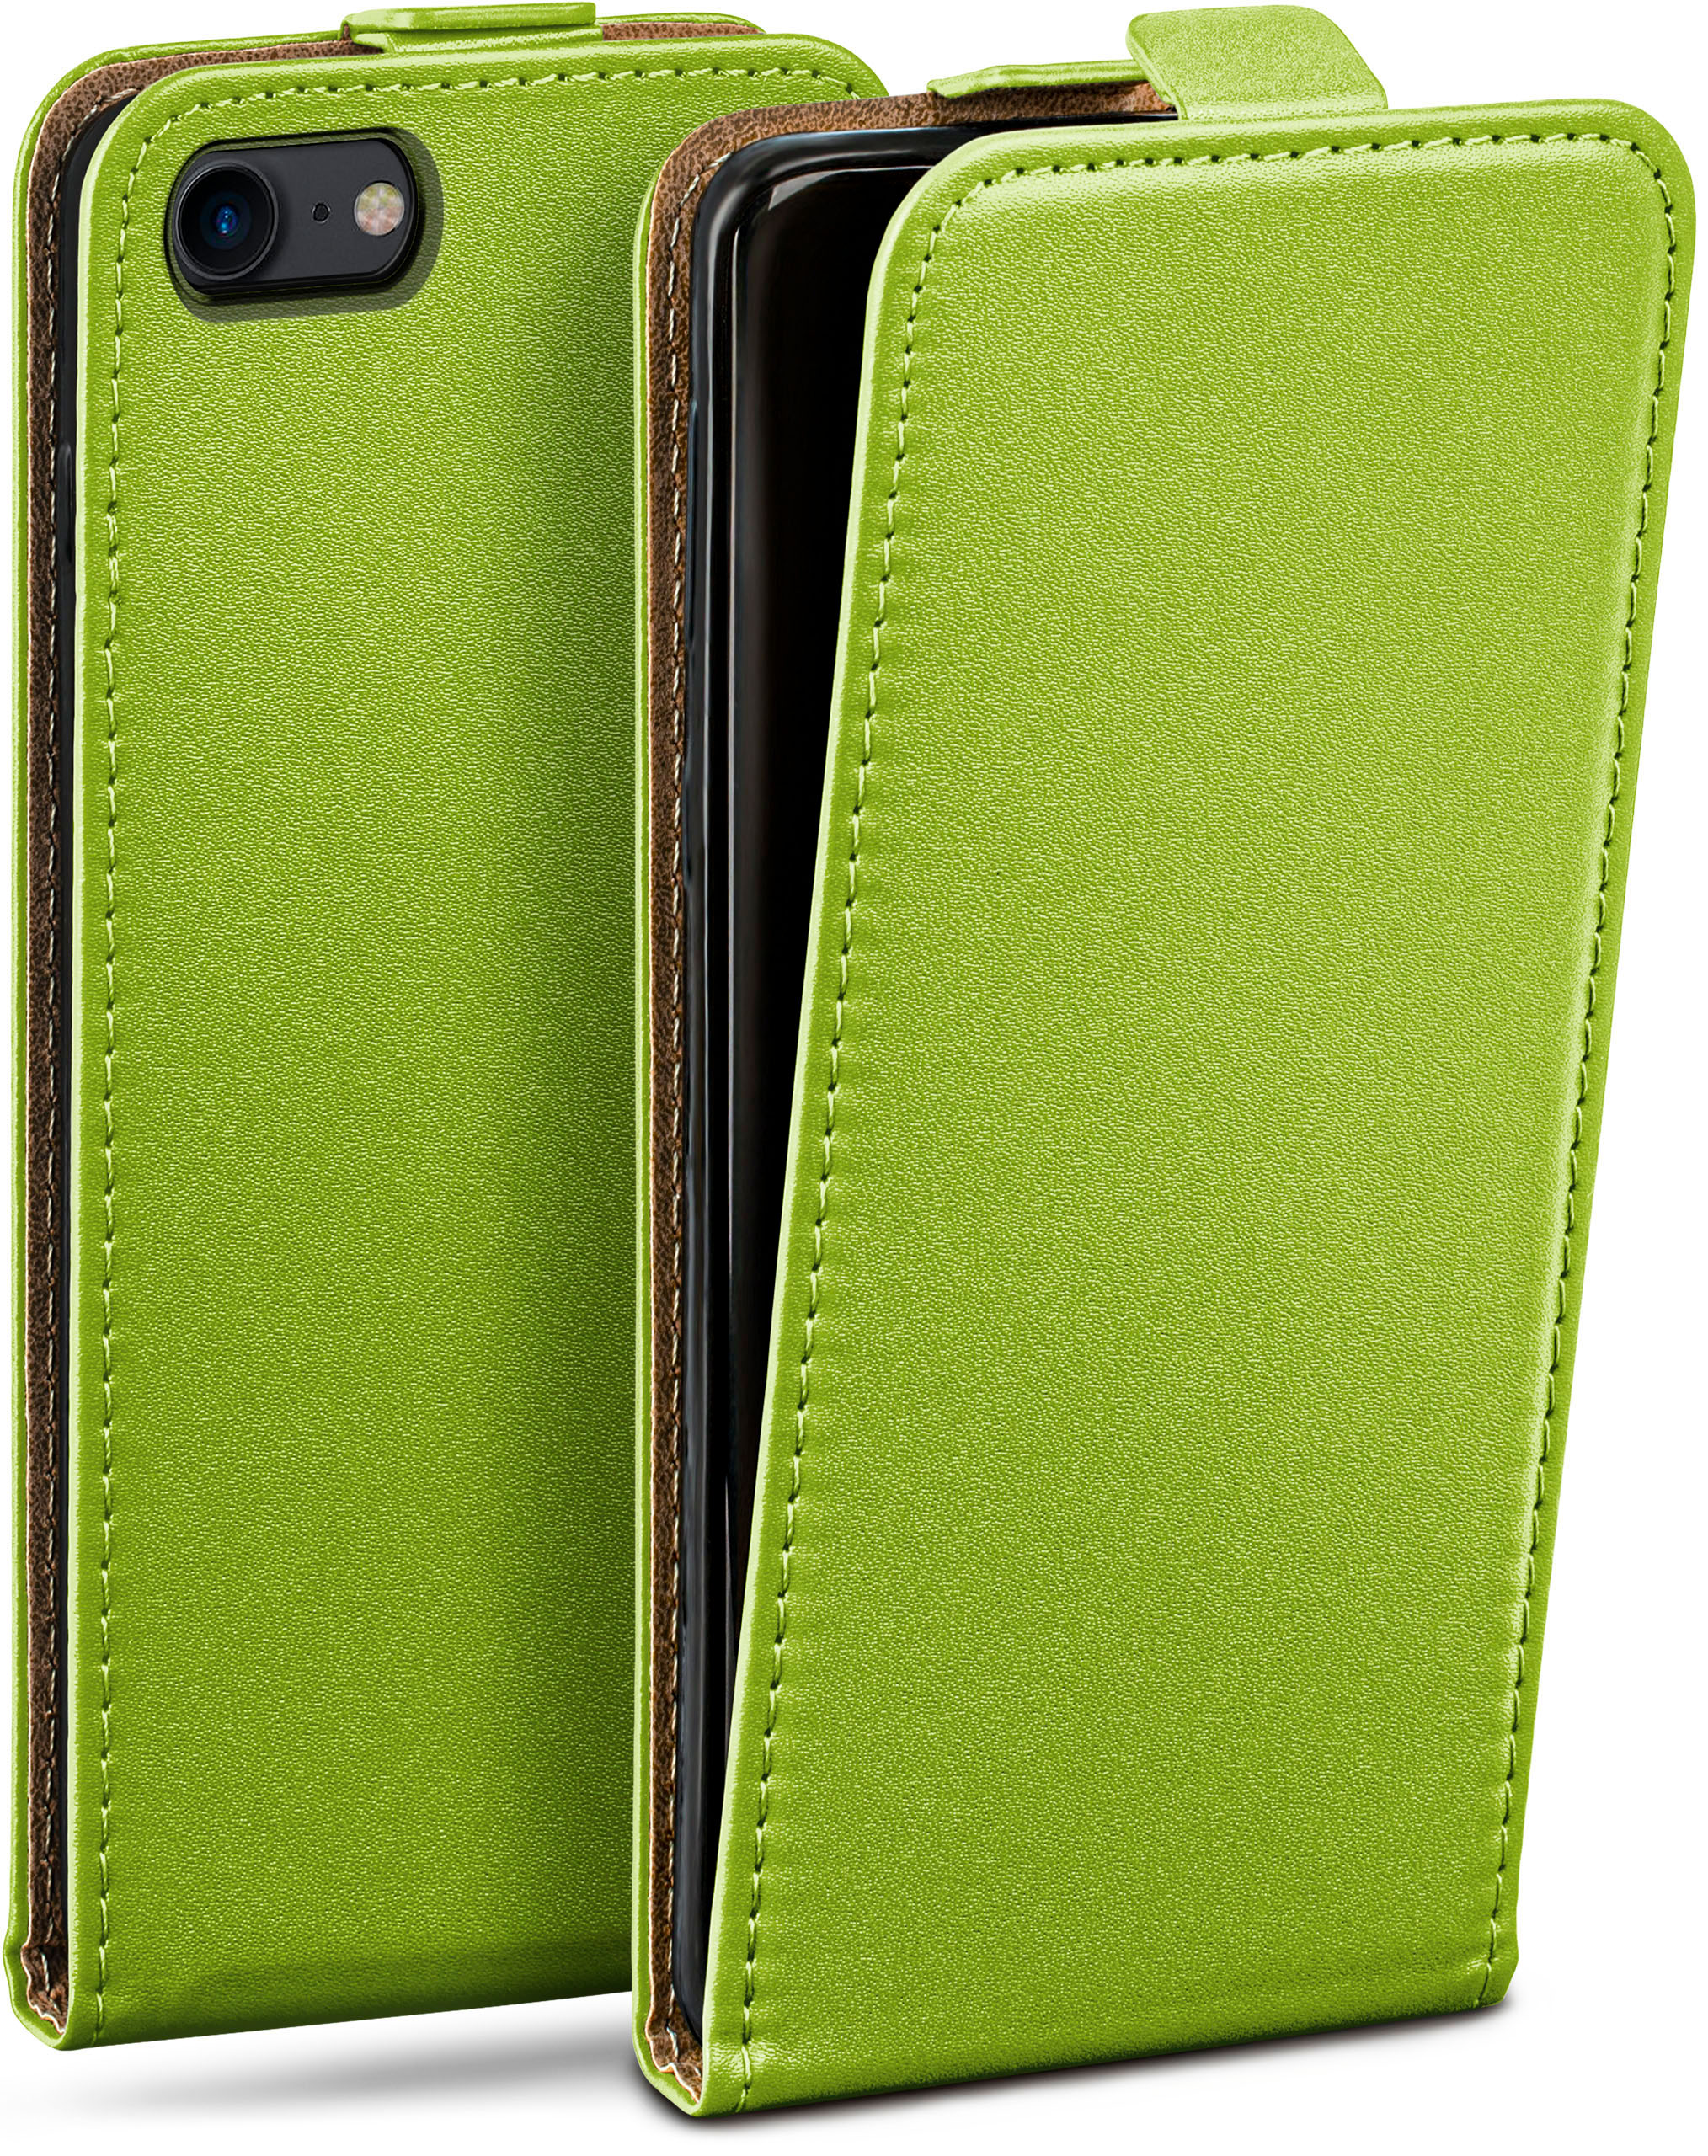 MOEX Flip Flip 8, Apple, iPhone Case, Lime-Green Cover, / iPhone 7